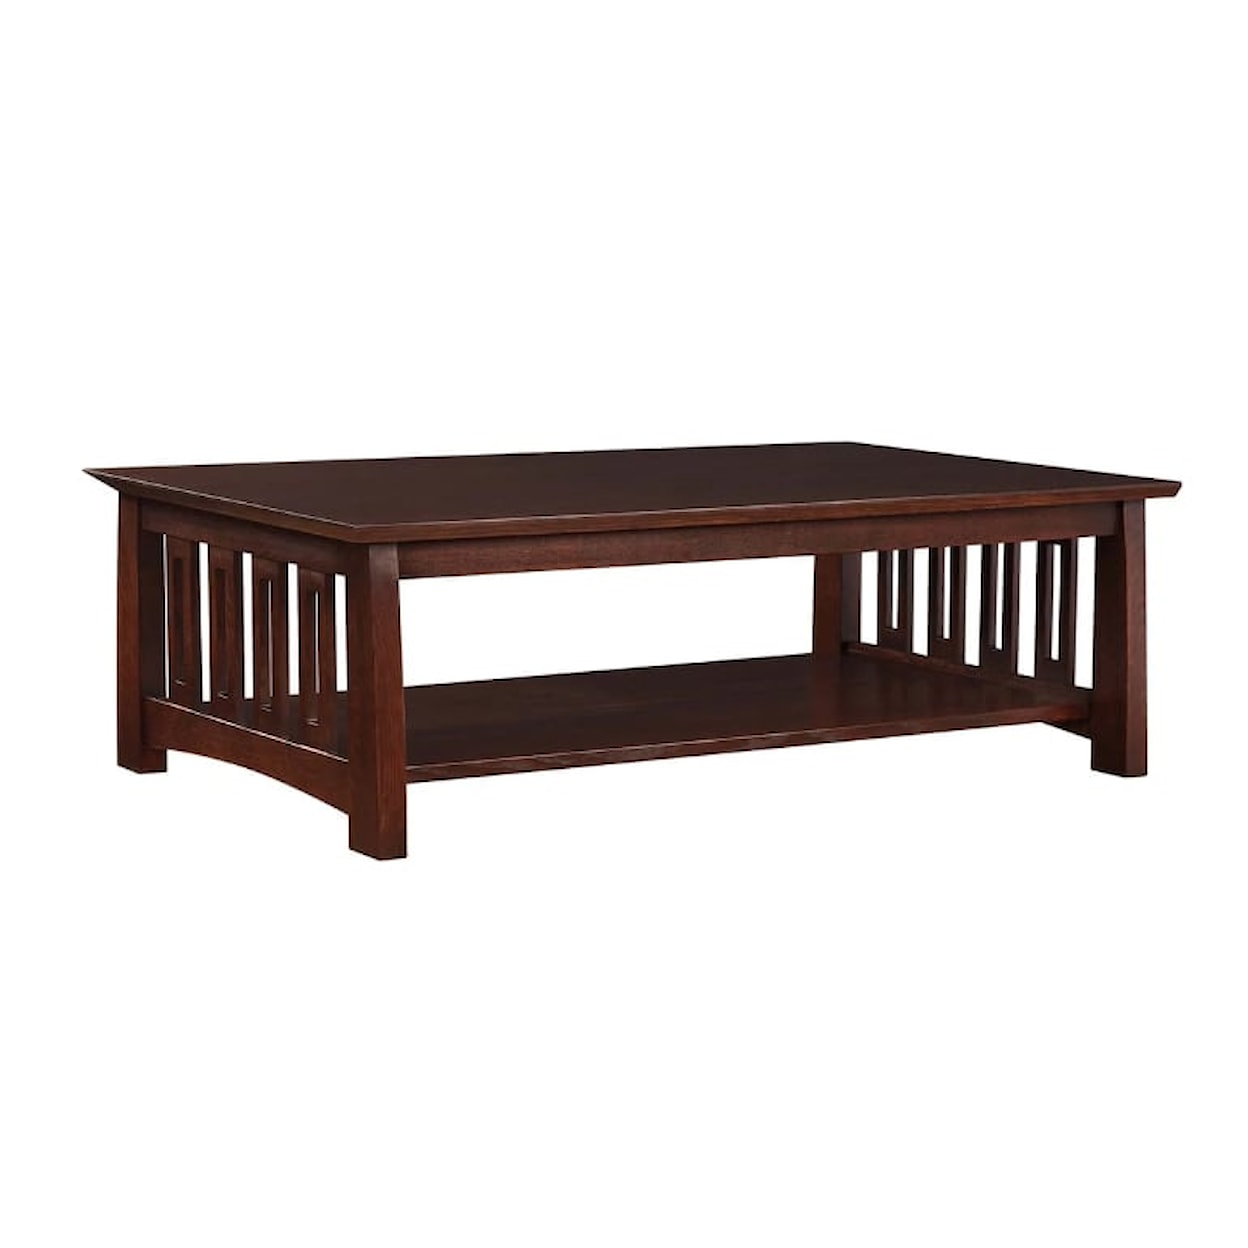 Stickley Highlands Coffee Table